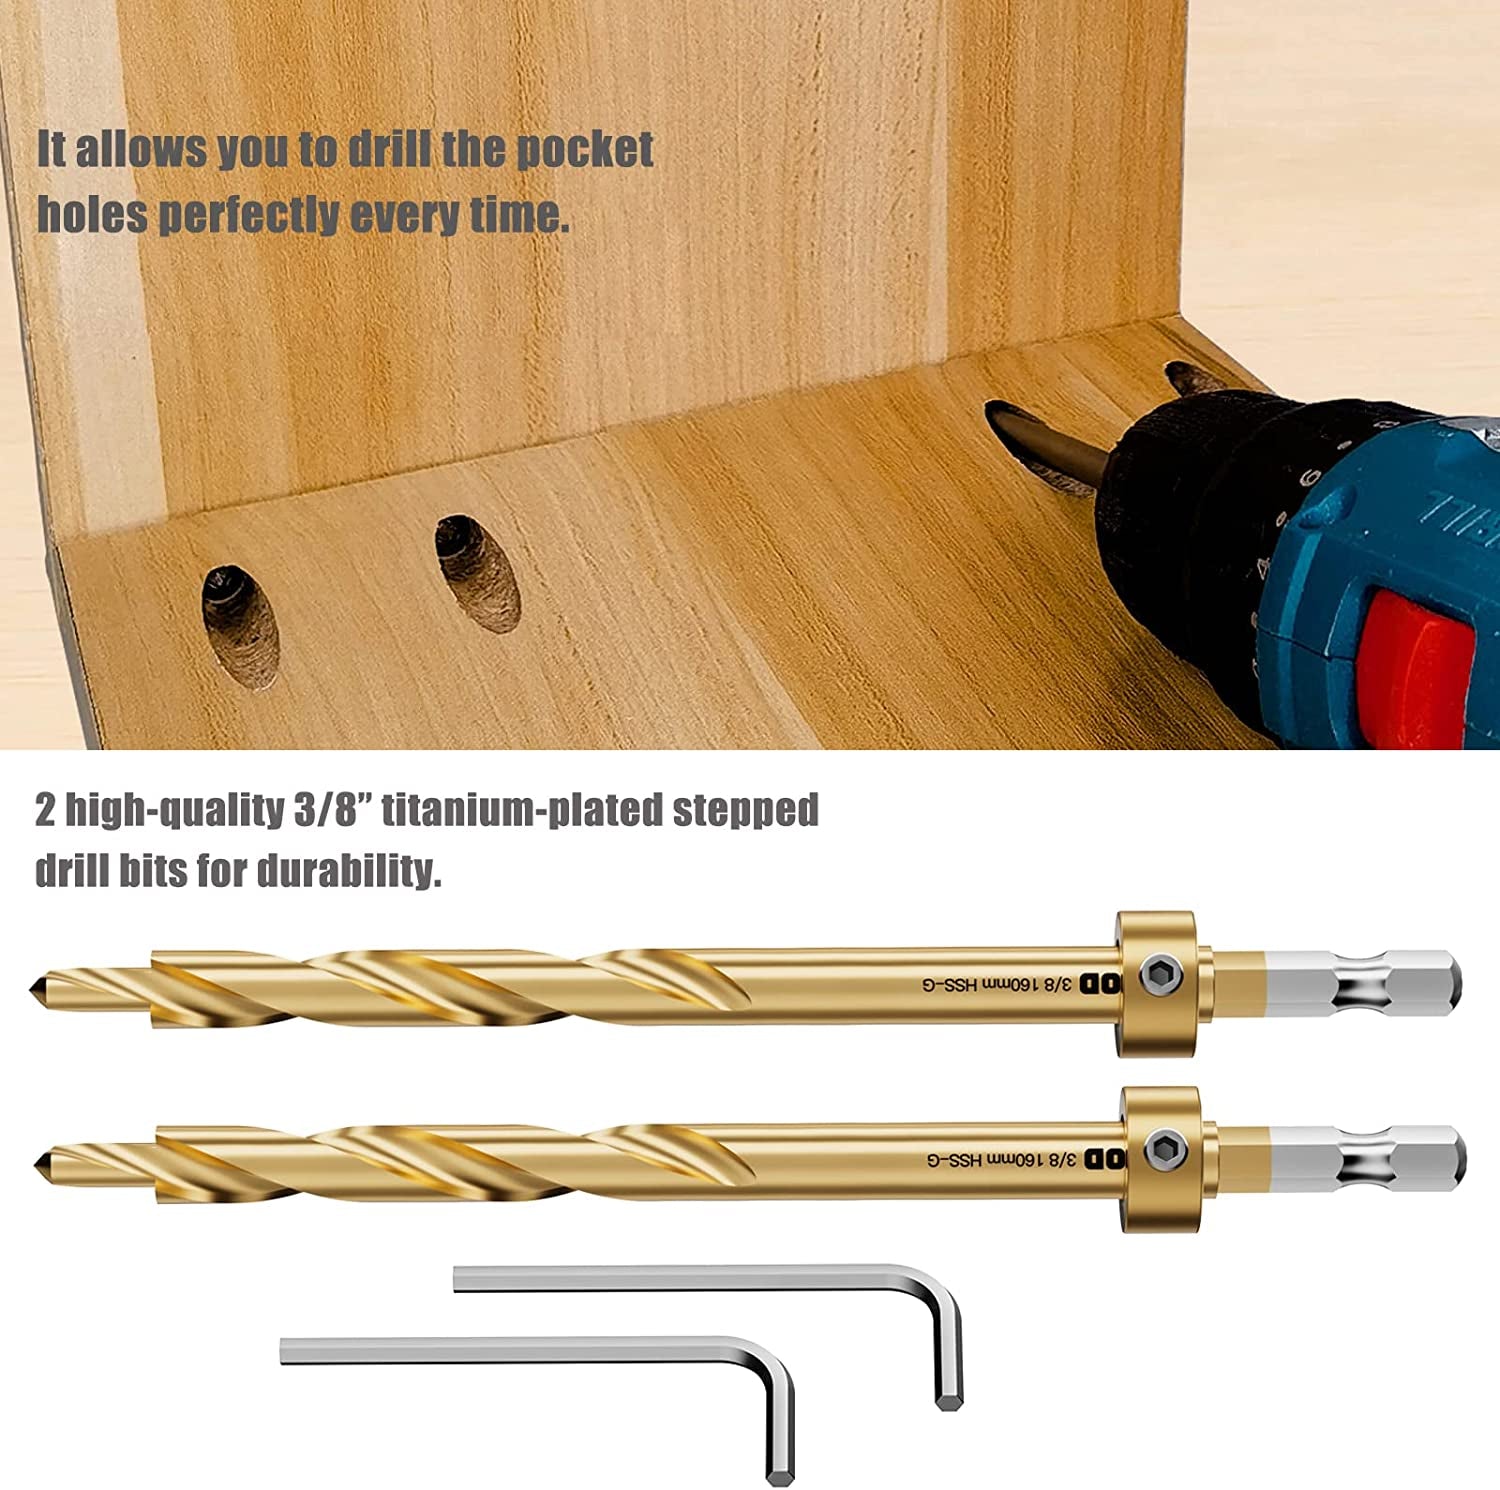 Pocket Hole Jig Kit, Professional and Upgraded Metal Pocket Screw Jig with Removable Vacuum Adapter.